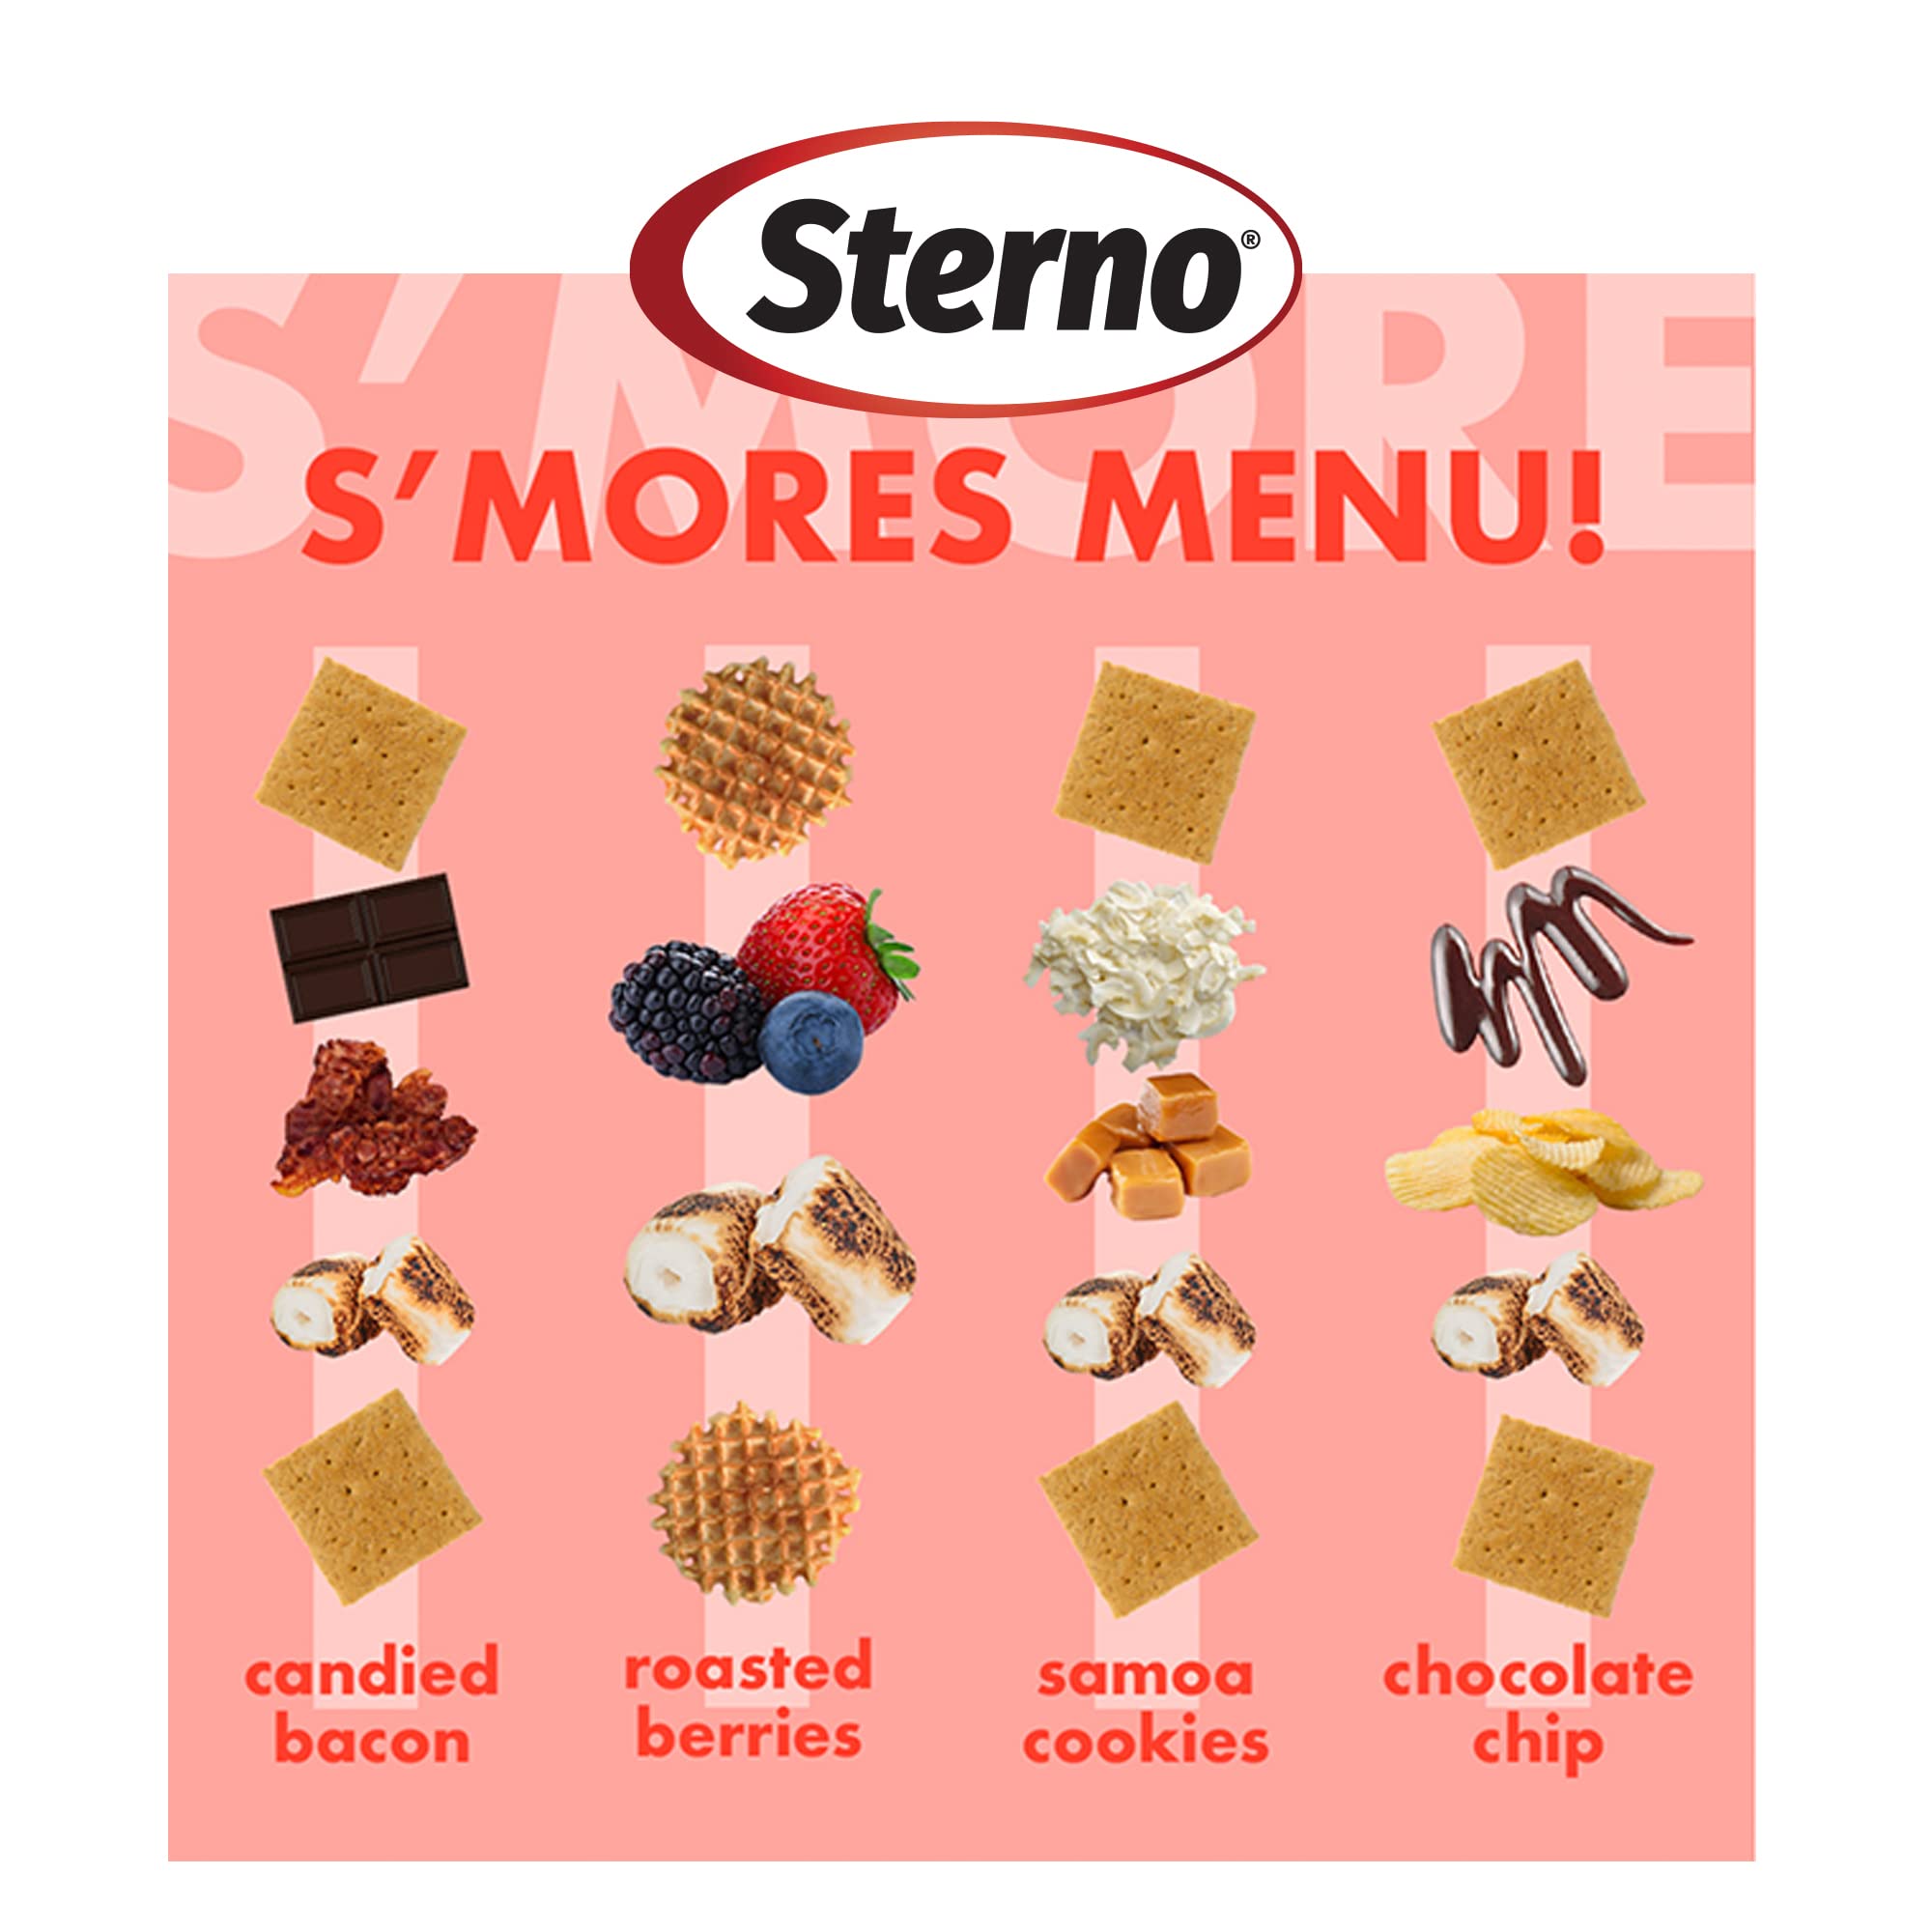 Sterno Table Top Smores Maker Kit with Easy Clean Serving Tray, Designed for Safe, Cord Free Indoor or Outdoor Fun, or Ideal for Kids, Parties, Fun Housewarming Gifts and More Red